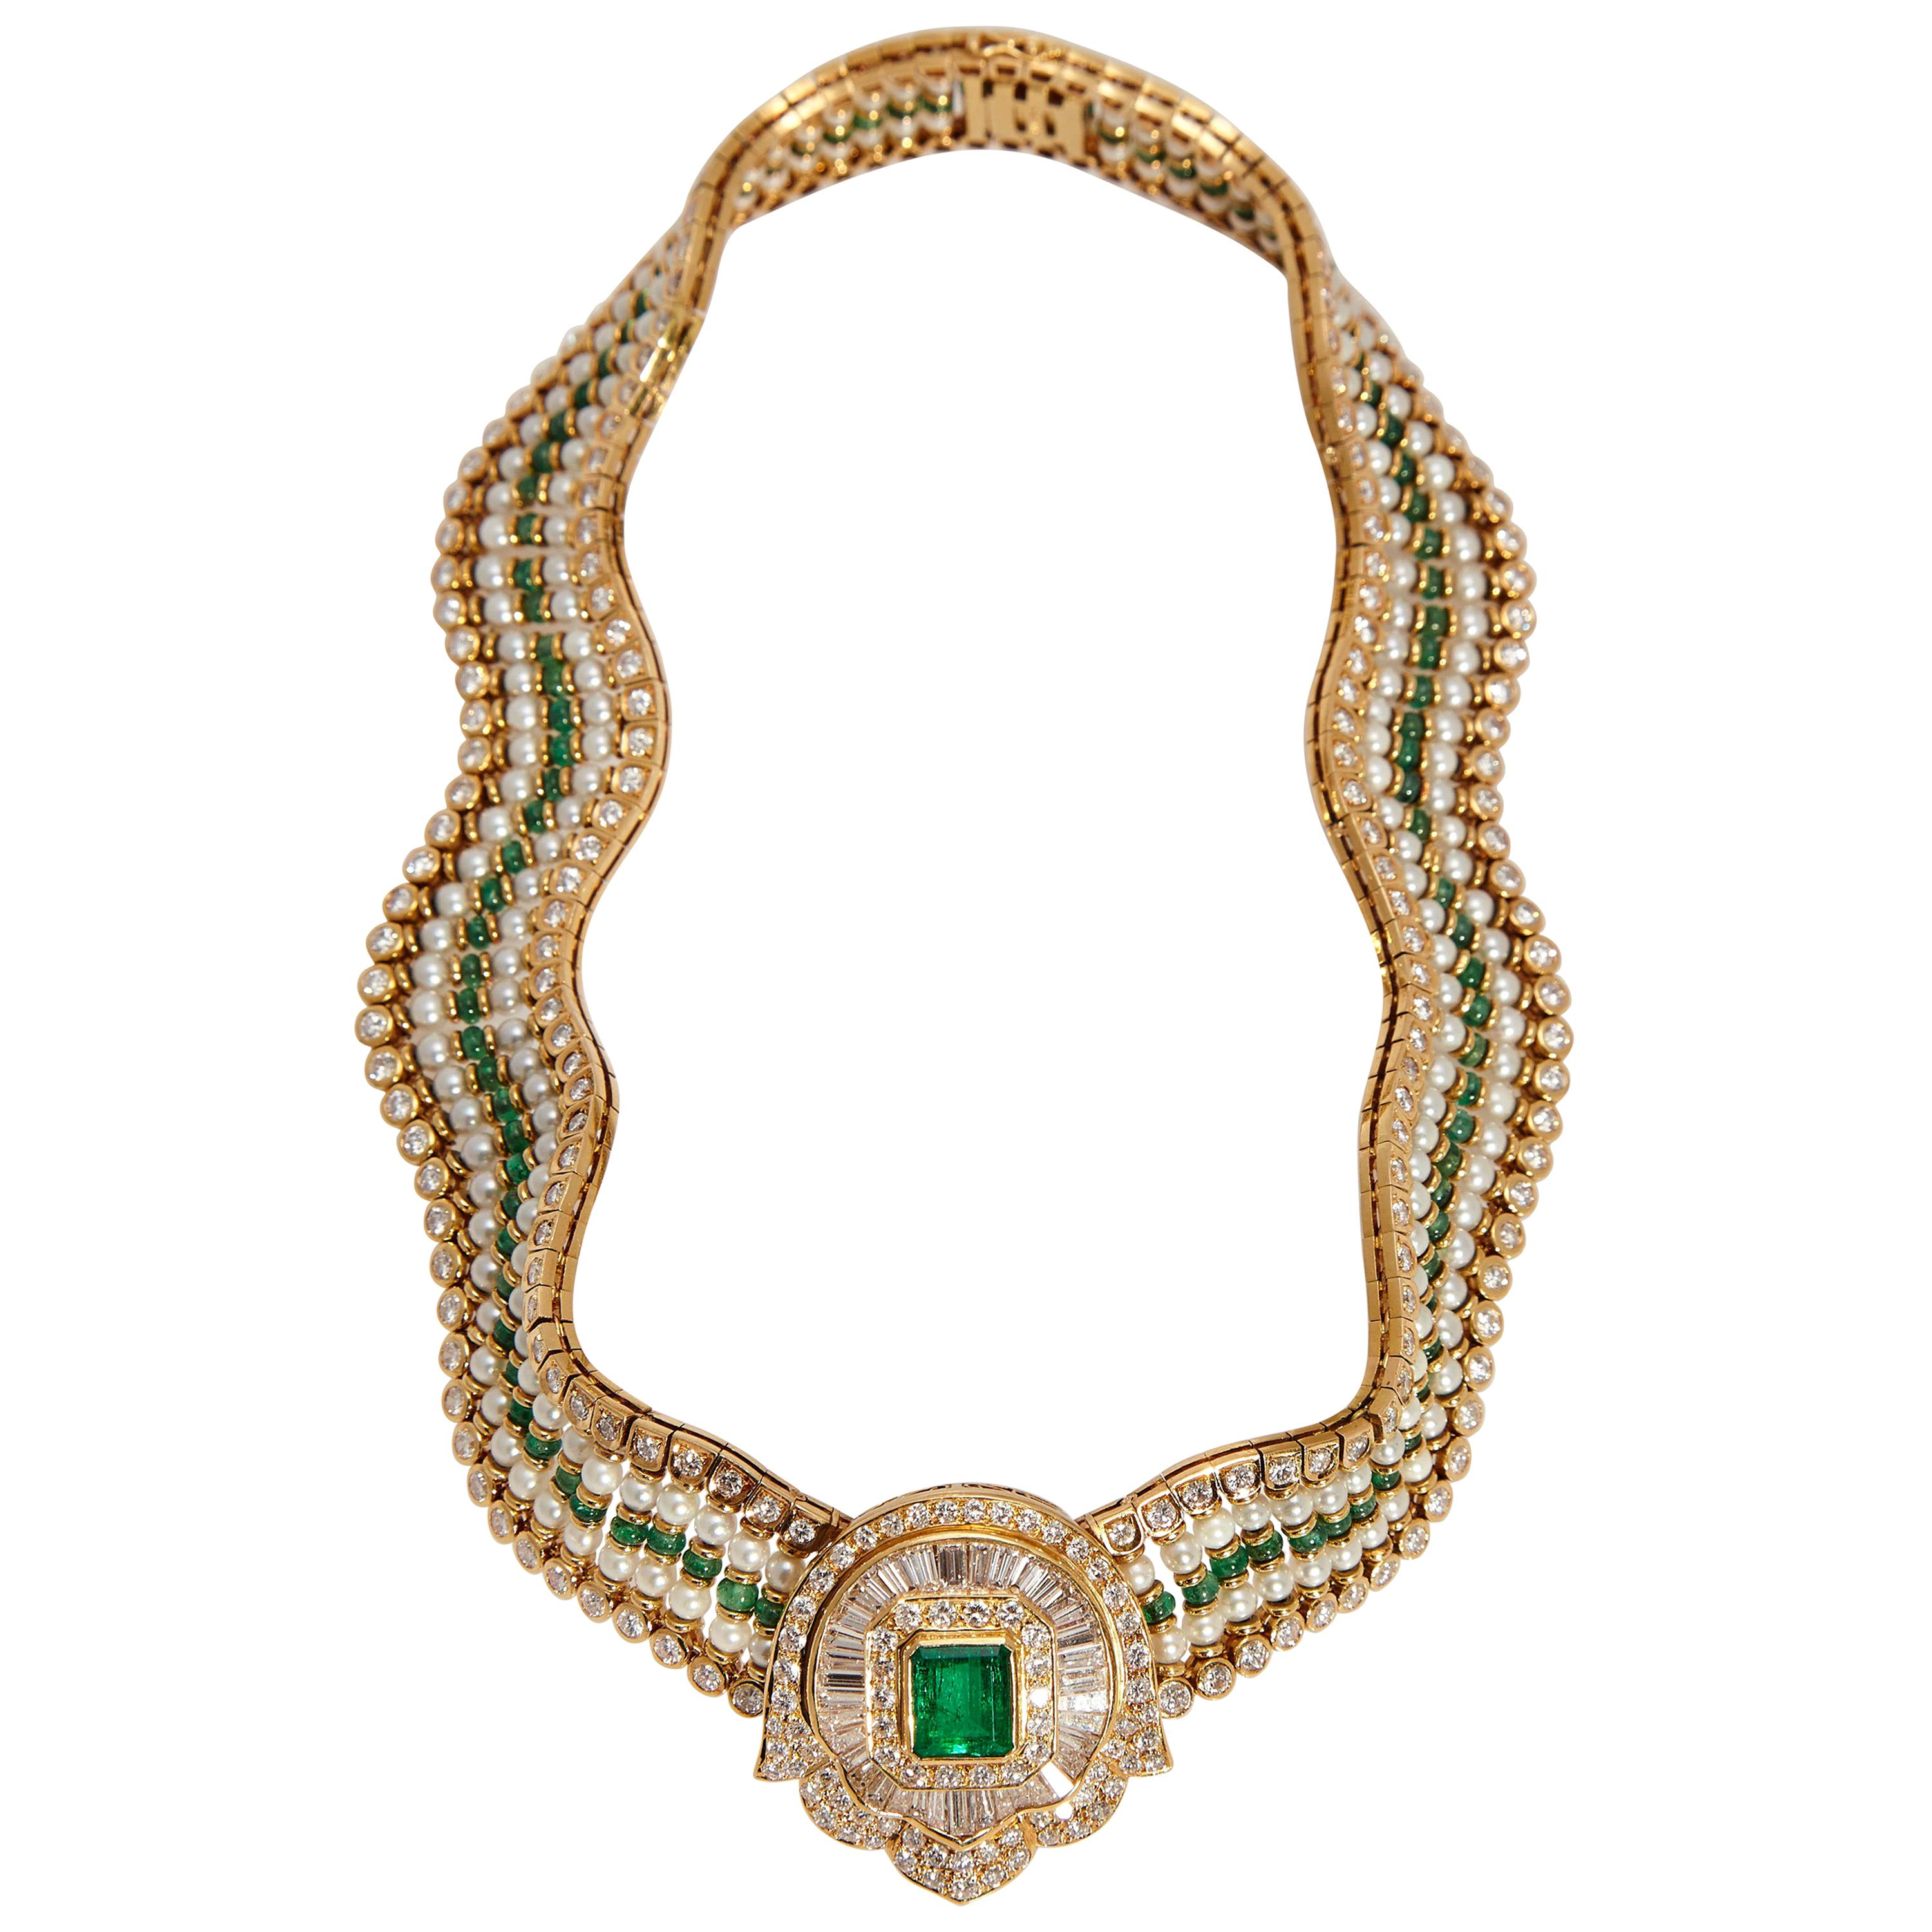 Exquisite Emerald Diamond and Pearl Necklace